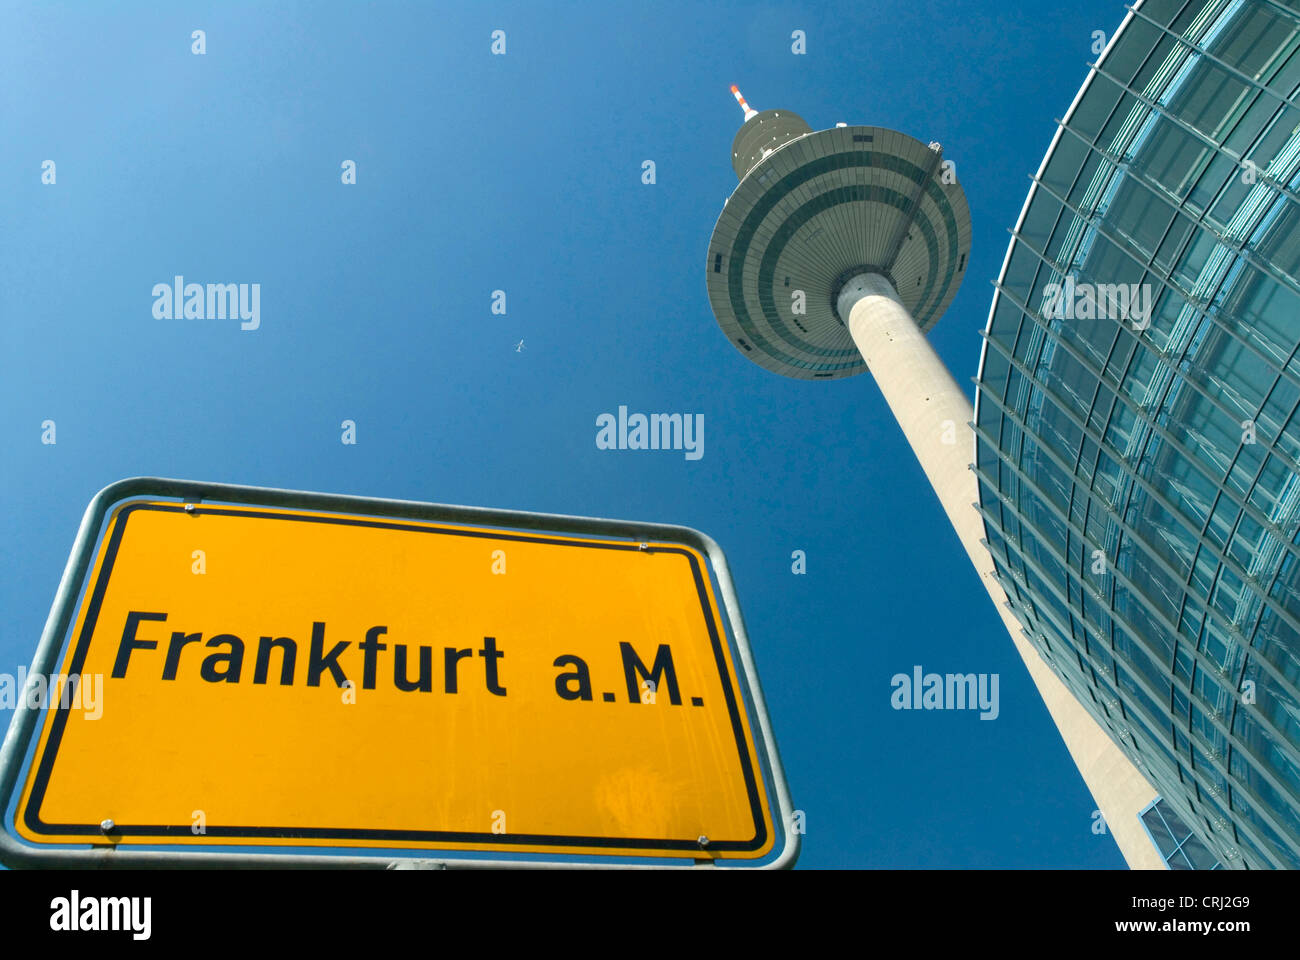 TV-Tower with city sign, Germany, Hesse, Frankfurt am Main Stock Photo